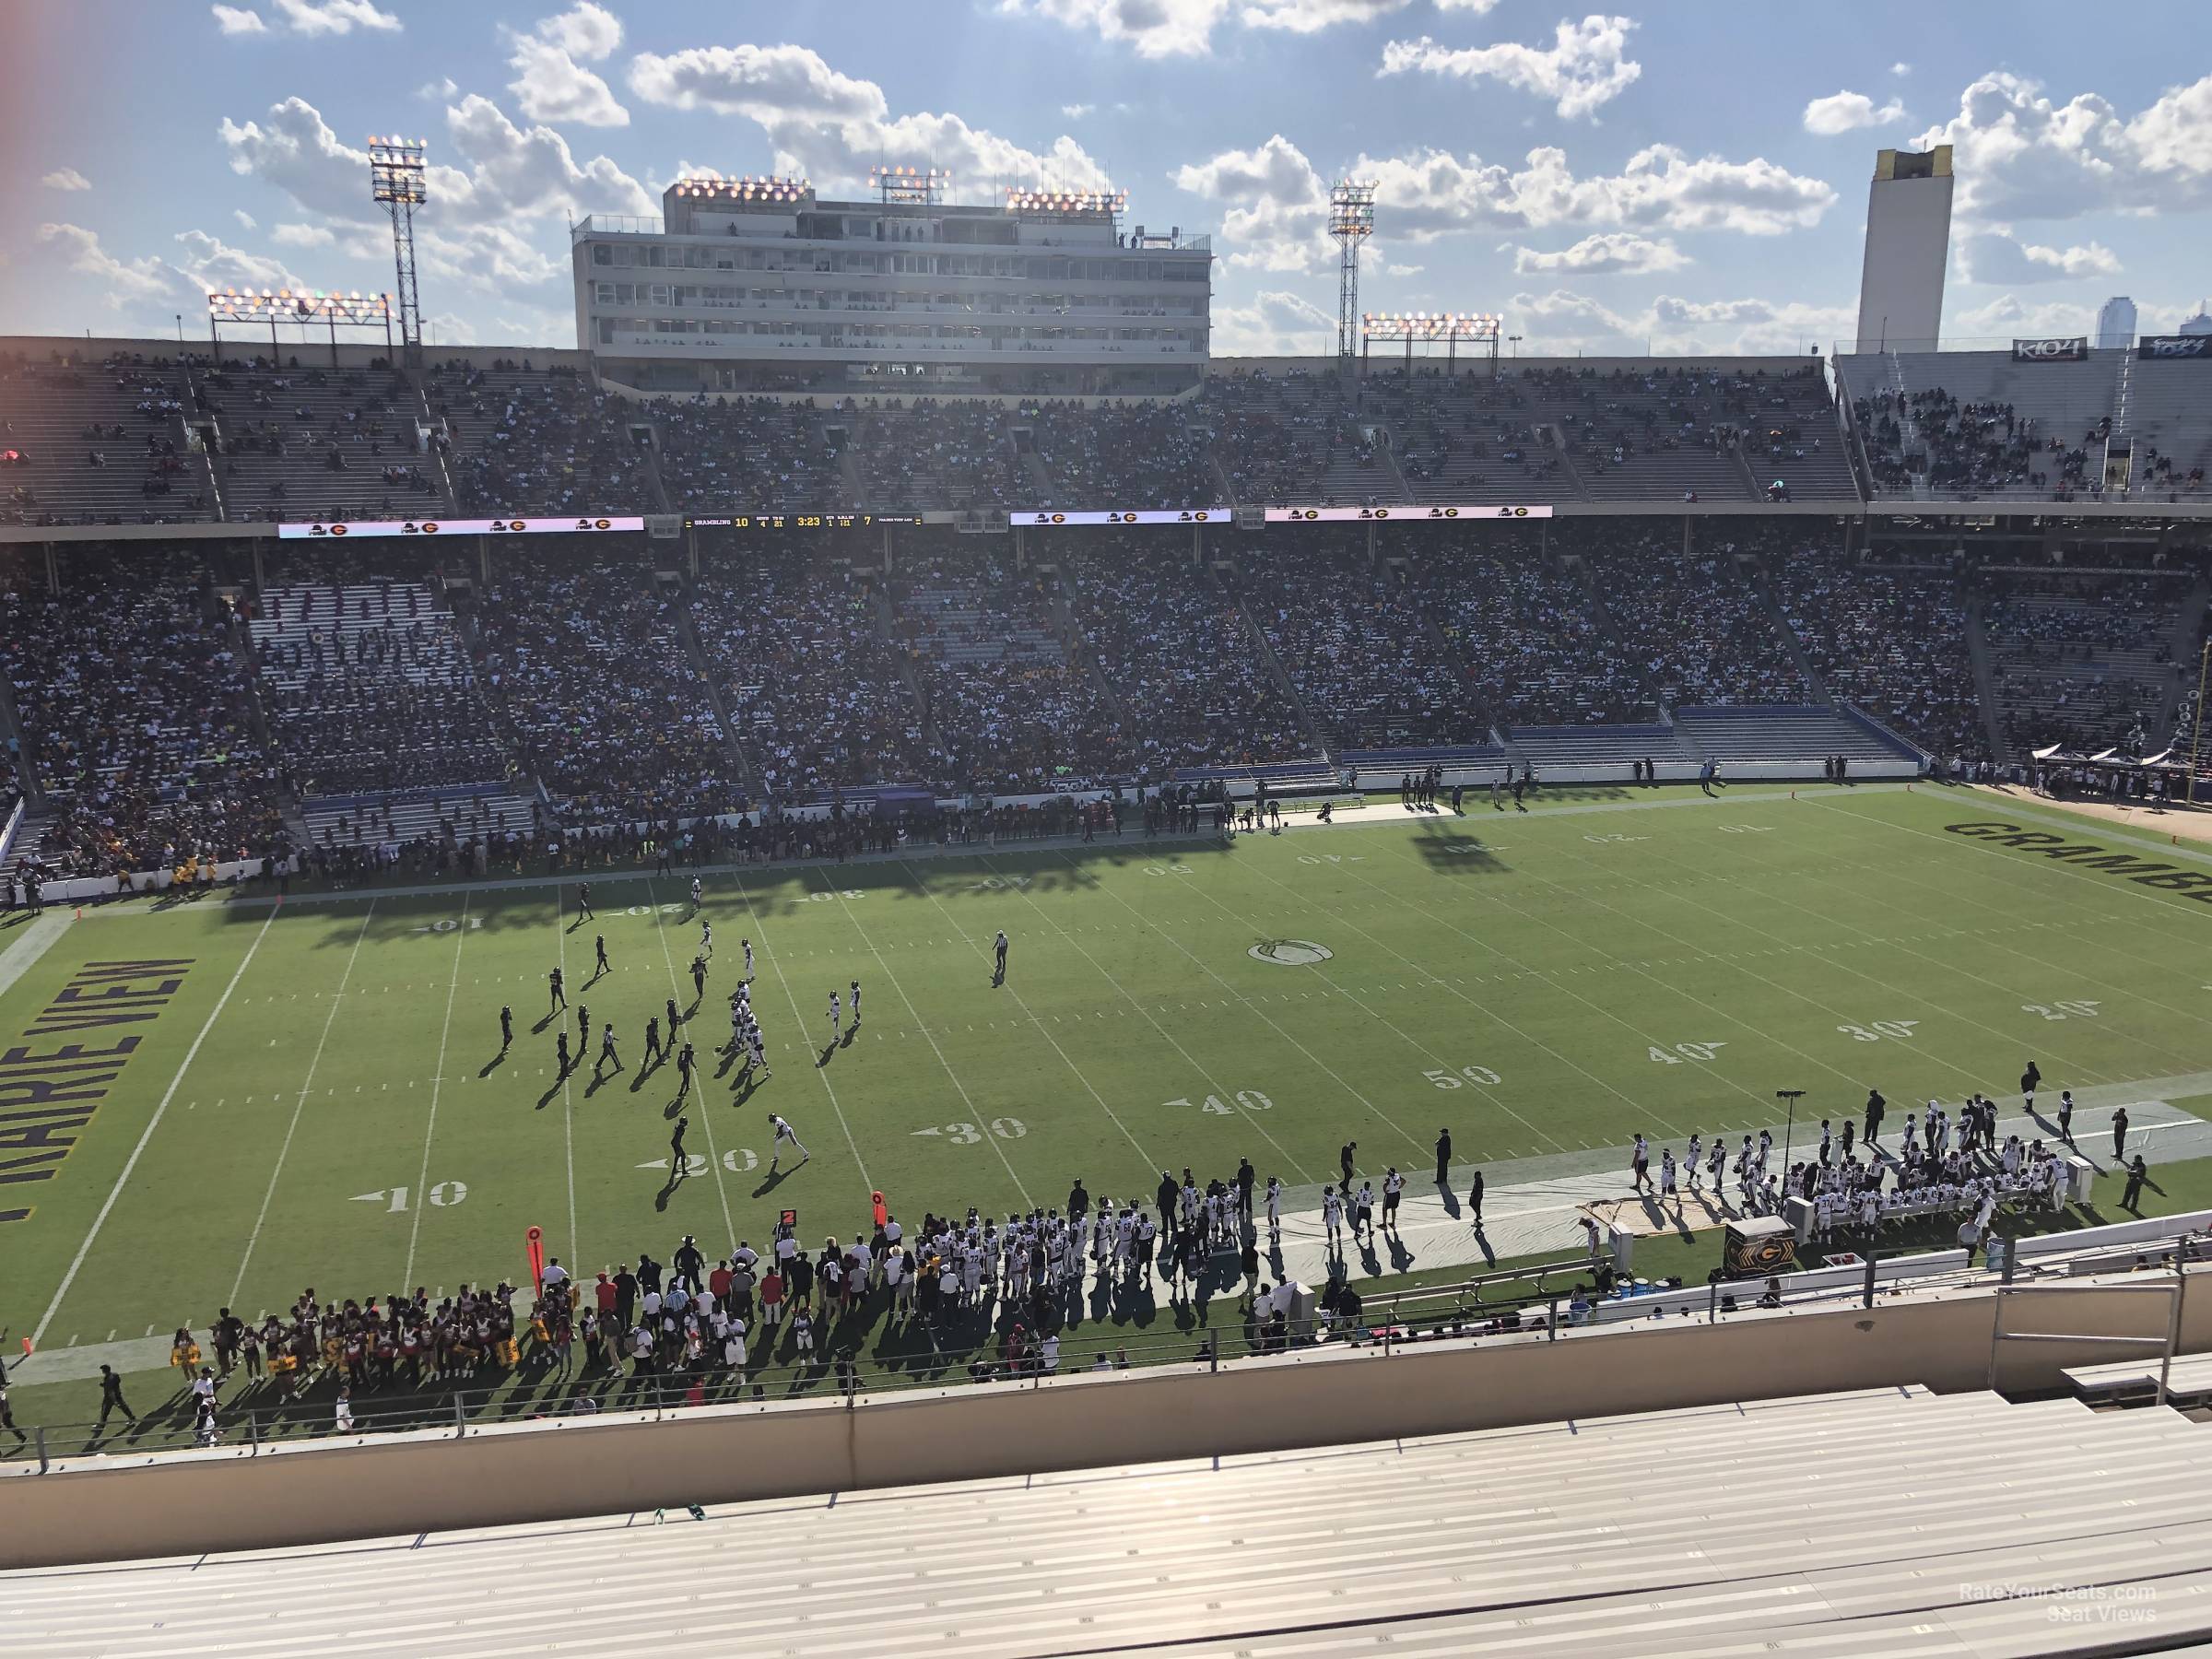 section 130, row 16 seat view  - cotton bowl